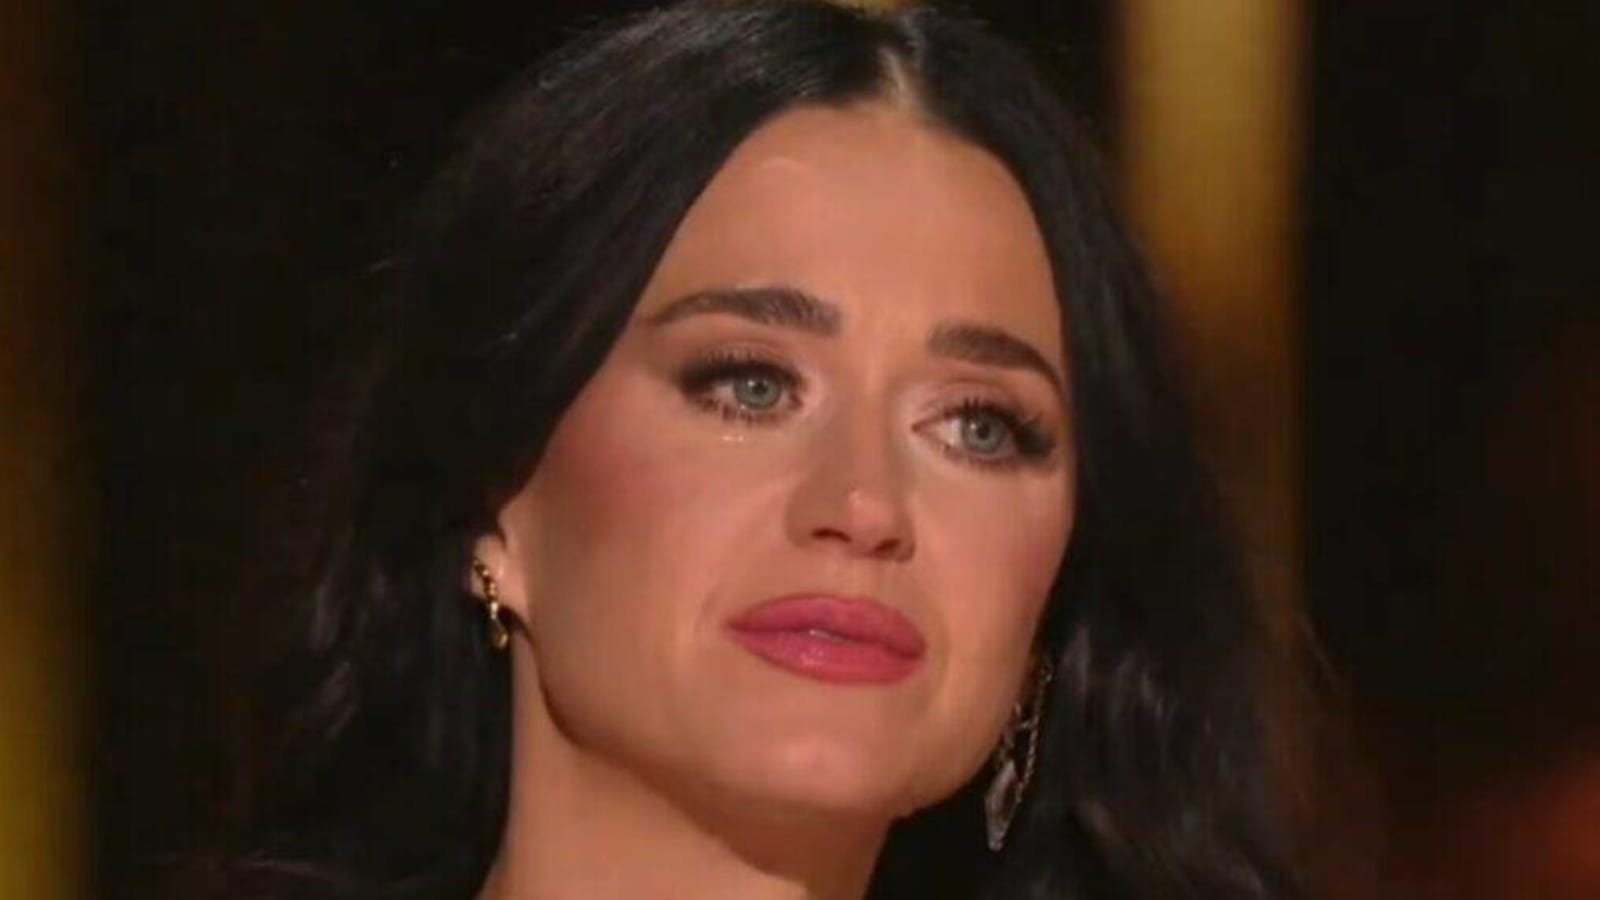 ‘American Idol’: Katy Perry Gets Emotional as She Bids Farewell After 7 Seasons